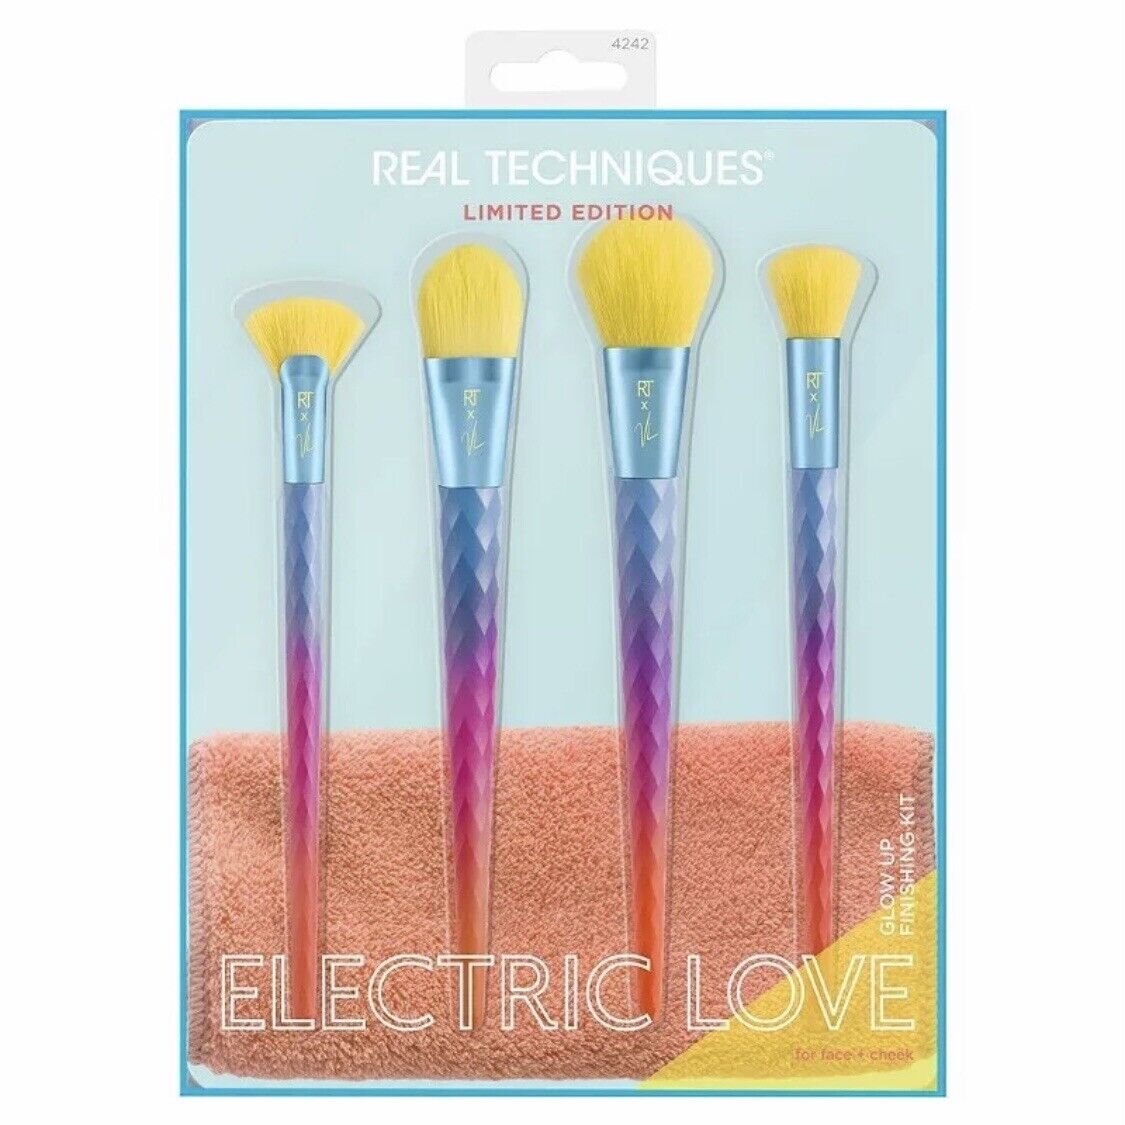 Real Techniques Electric Love Brush Set (Limited Edition)